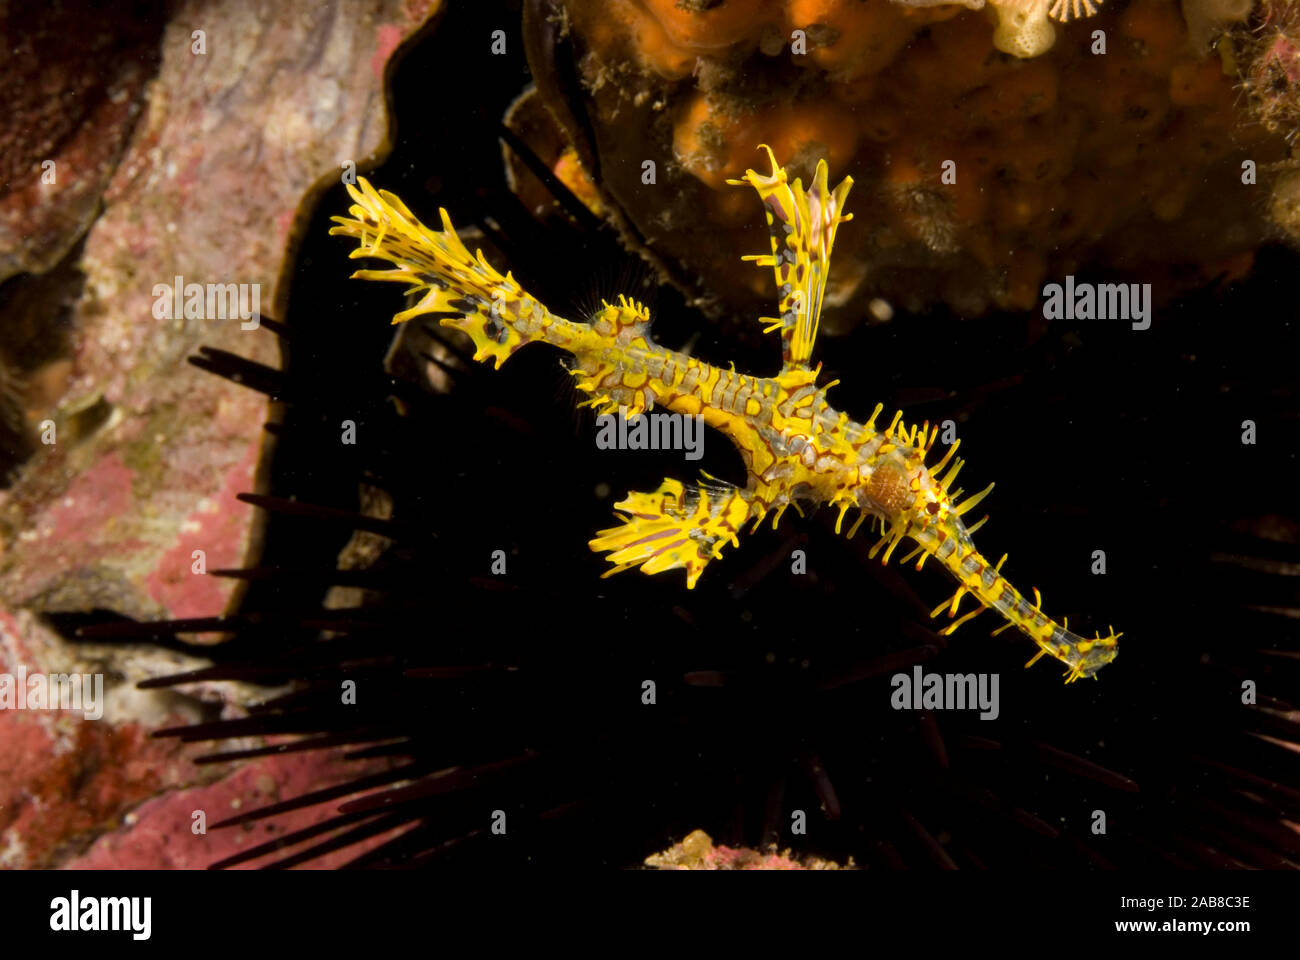 Ornate or Harlequin ghost pipefish (Solenostomus paradoxus), contrasting with a black sea urchin. North Solitary Island, New South Wales, Australia Stock Photo